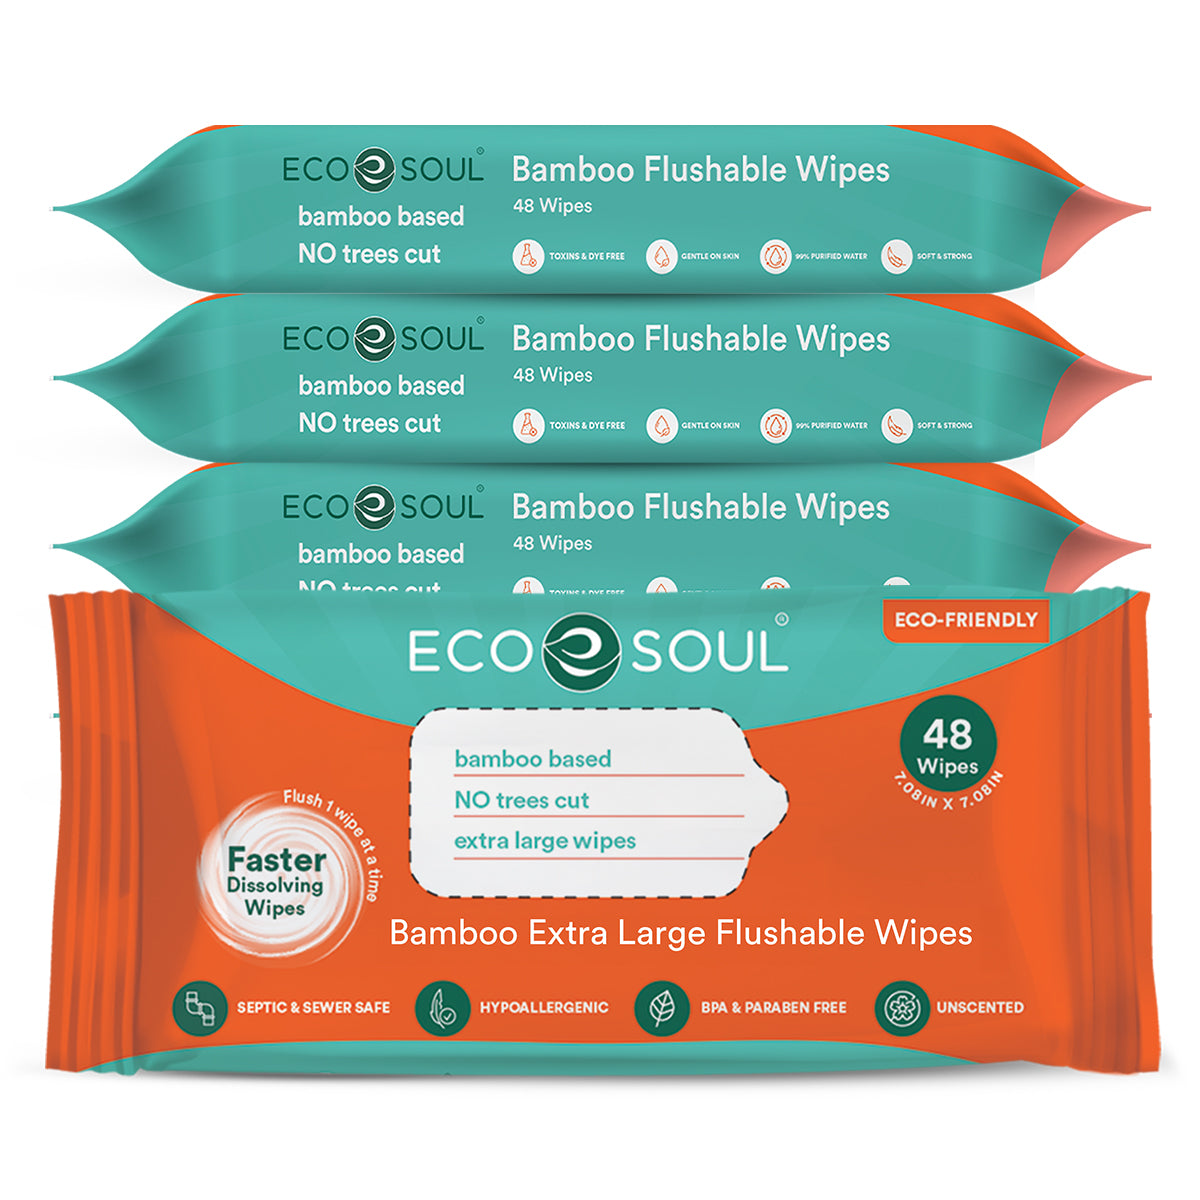 Bamboo Premium Flushable Wipes - 48 Wipes Per Pack